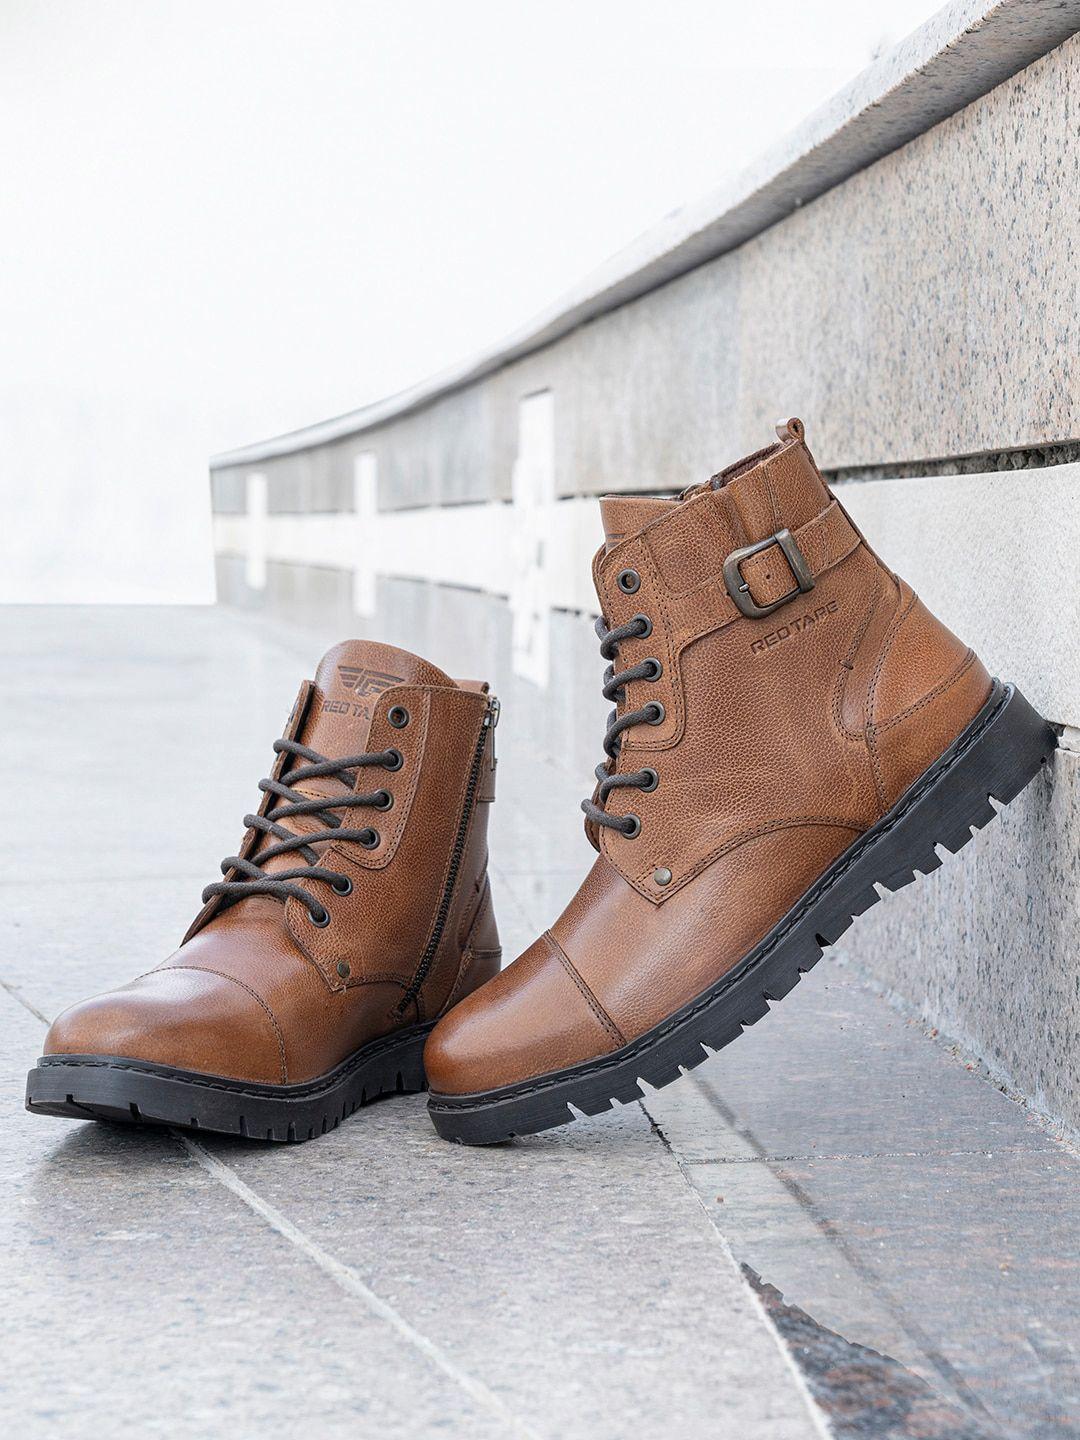 red tape men textured buckle detail anti-slip ground support leather mid-top biker boots